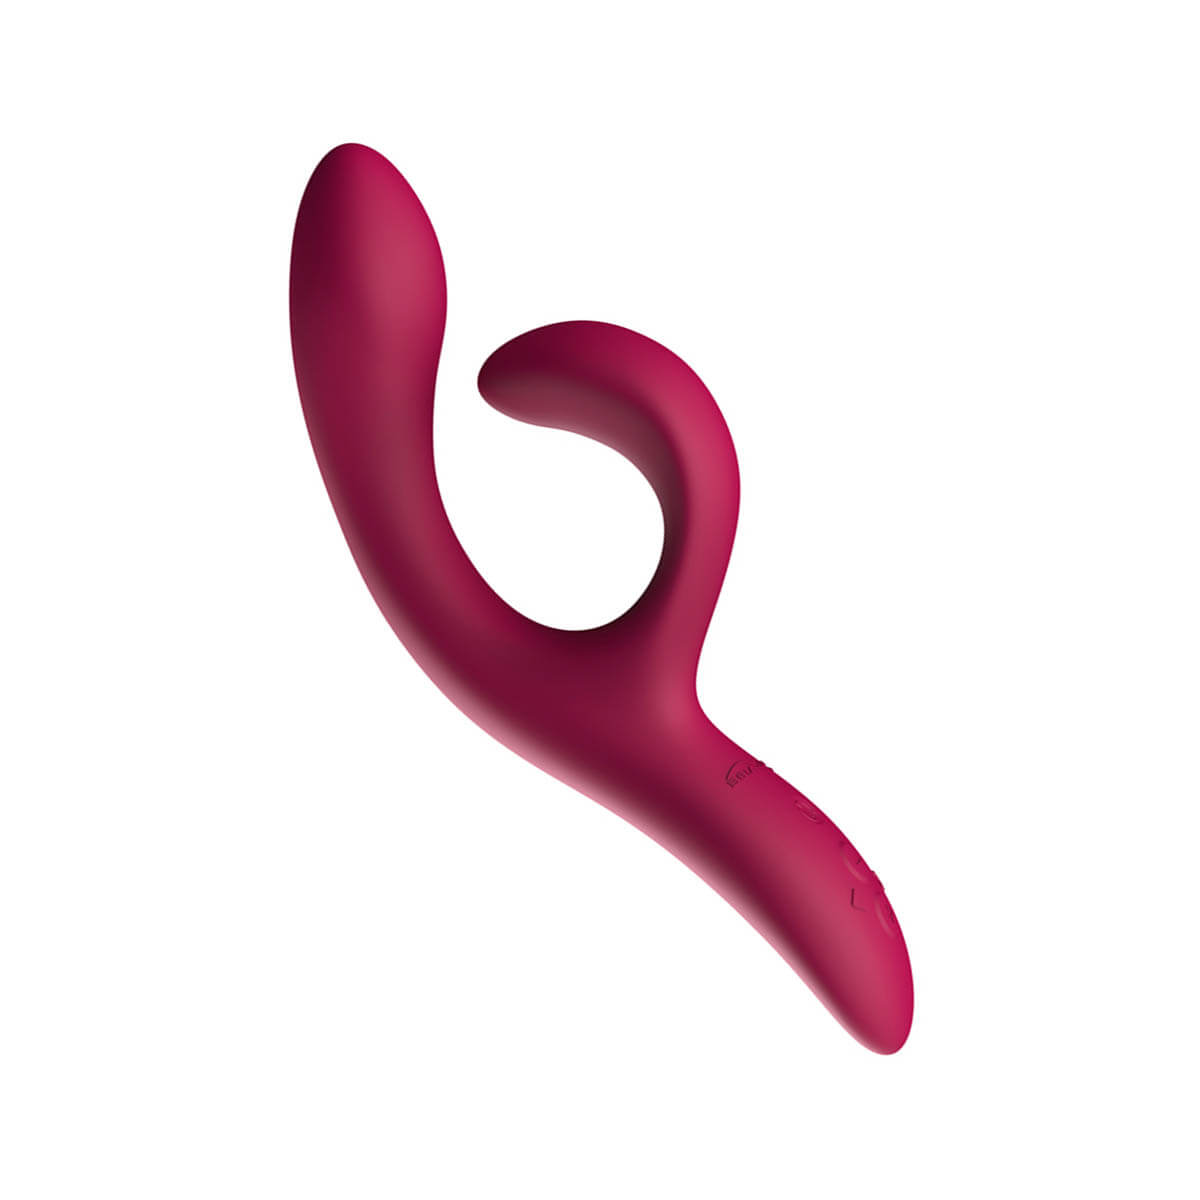 Red silicone vibrator with flexible tip for clitoris stimulation Nudie Co